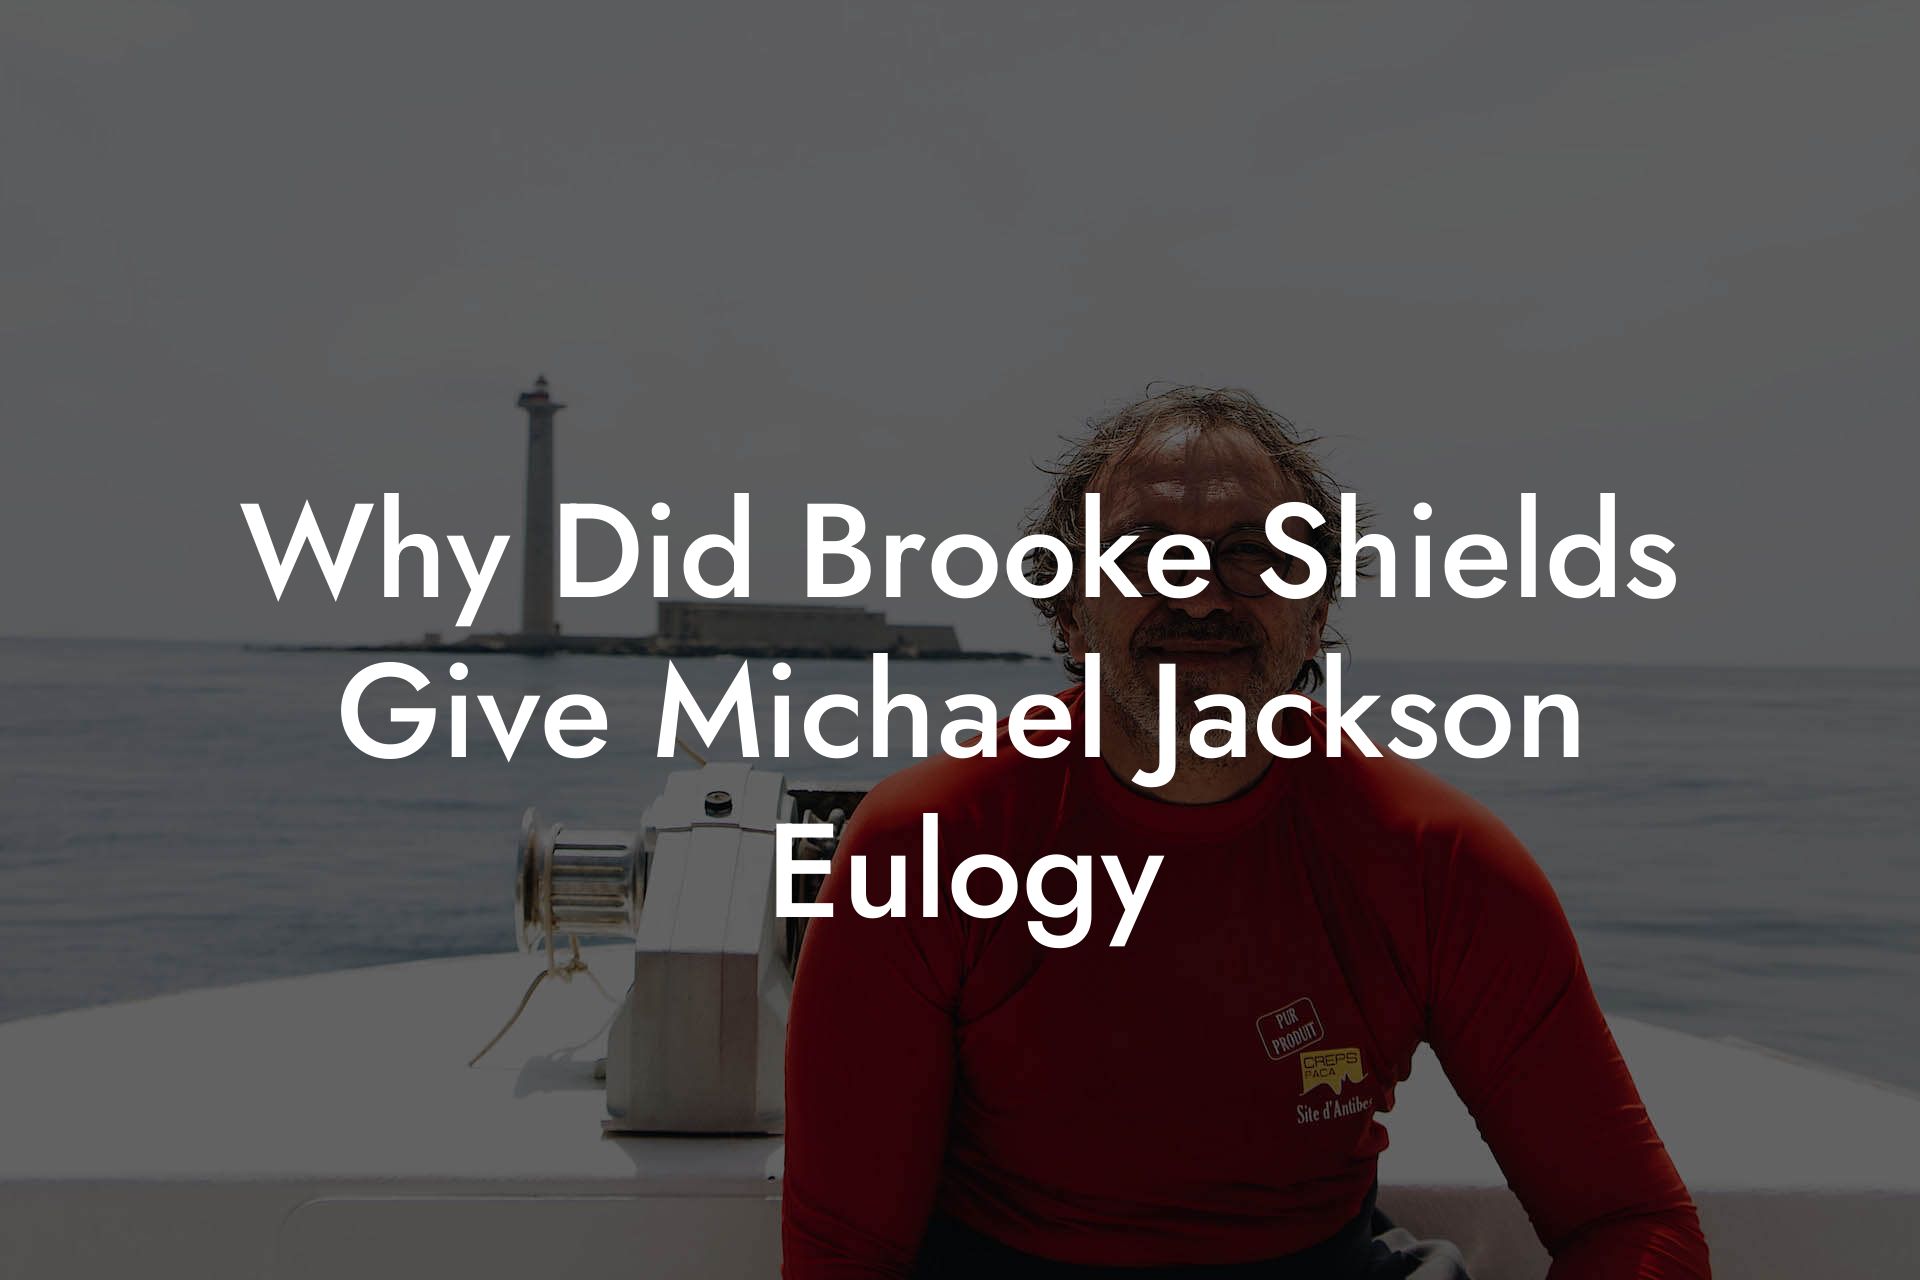 Why Did Brooke Shields Give Michael Jackson Eulogy